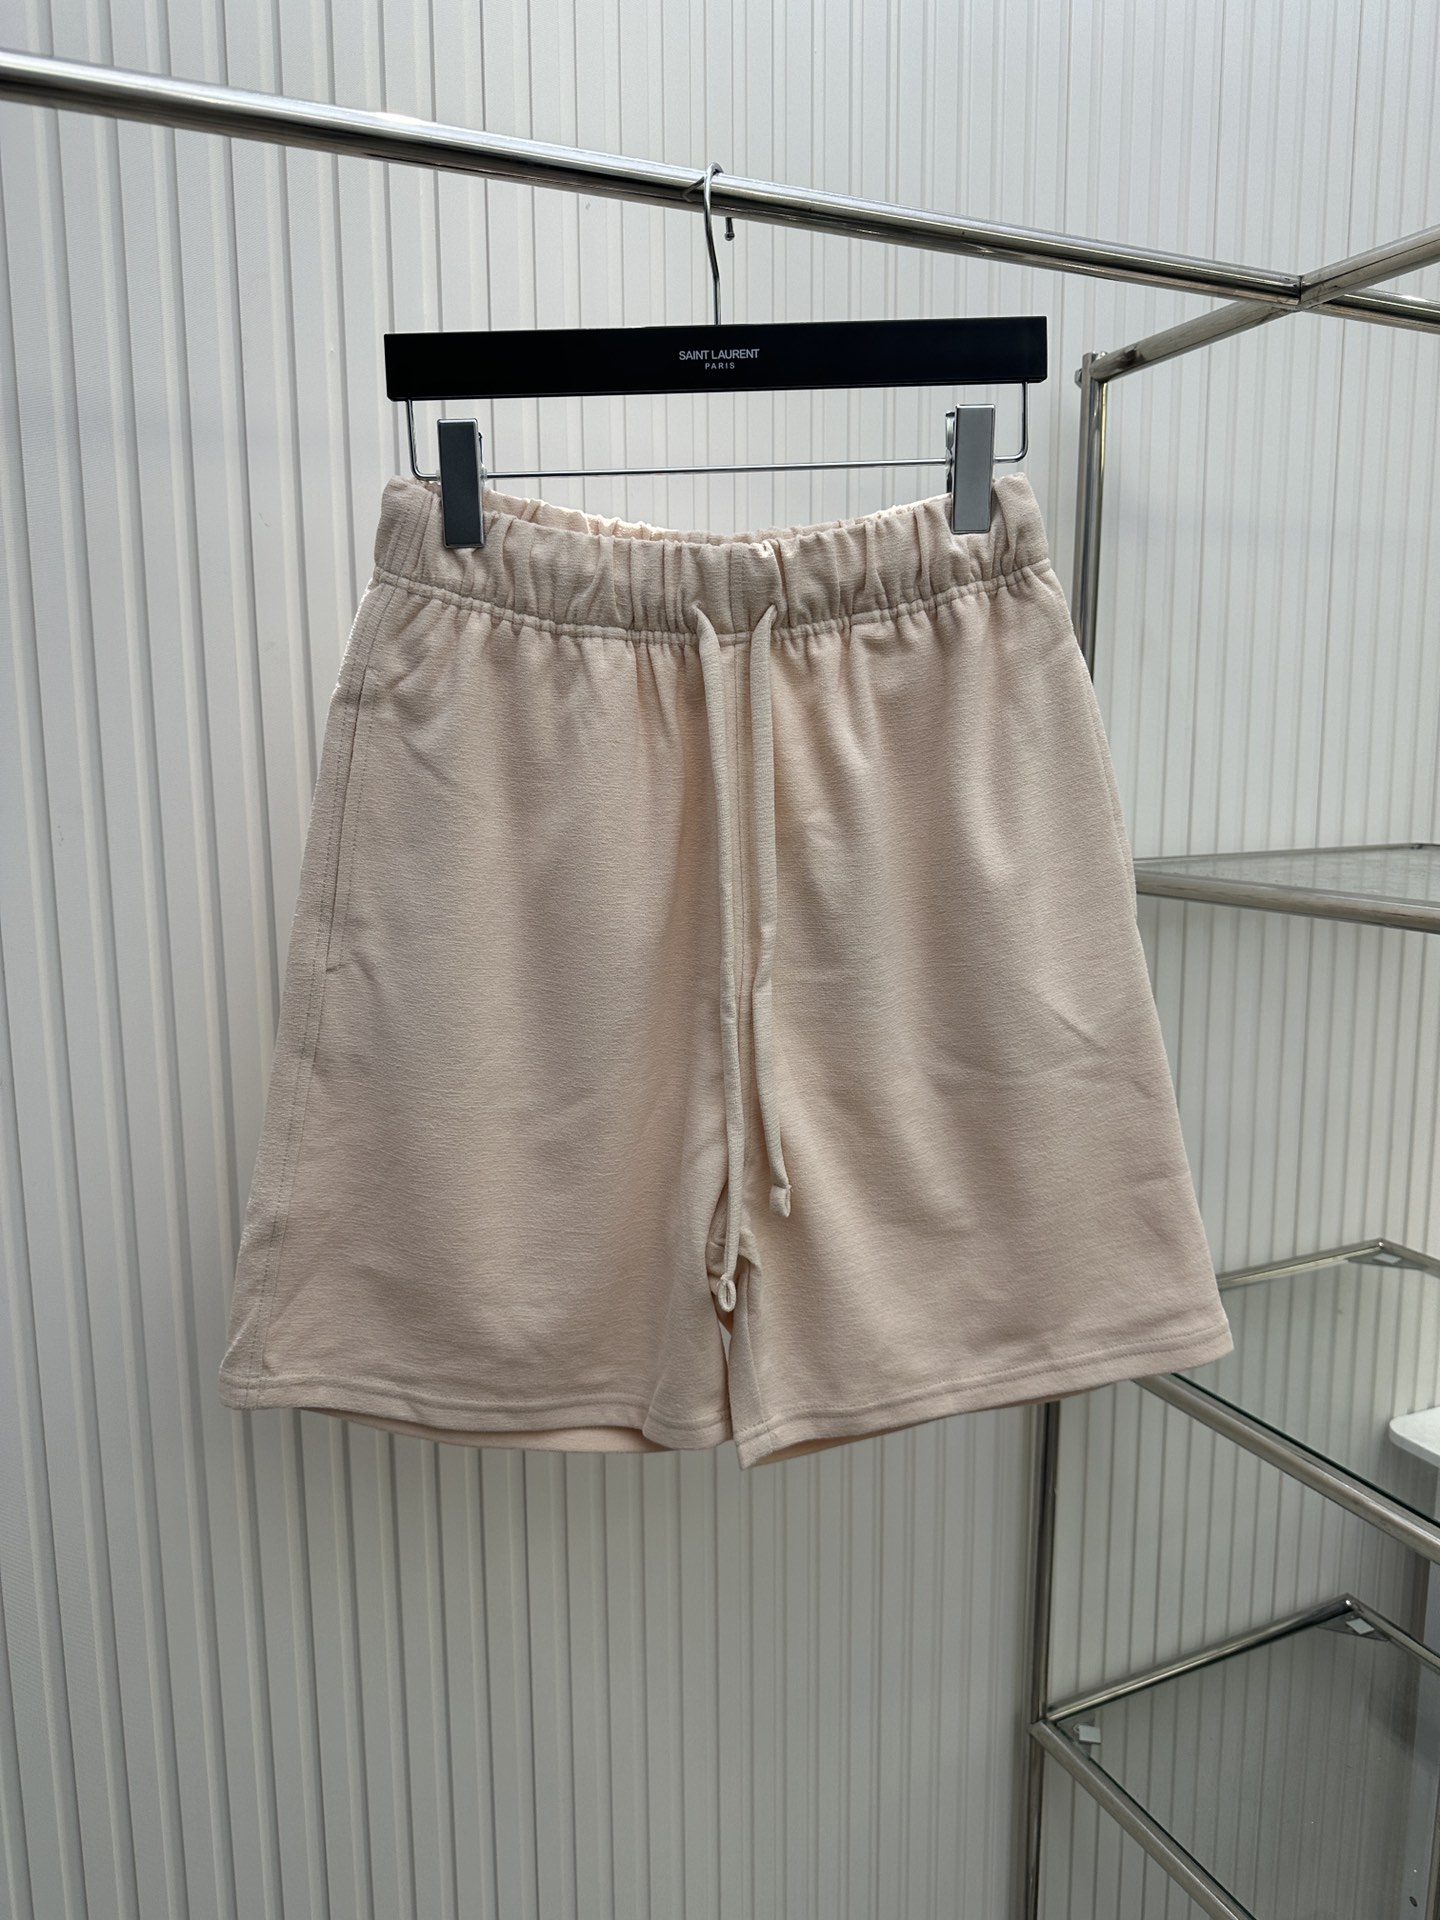 Burberry Clothing Shorts Sell Online Luxury Designer
 Cotton